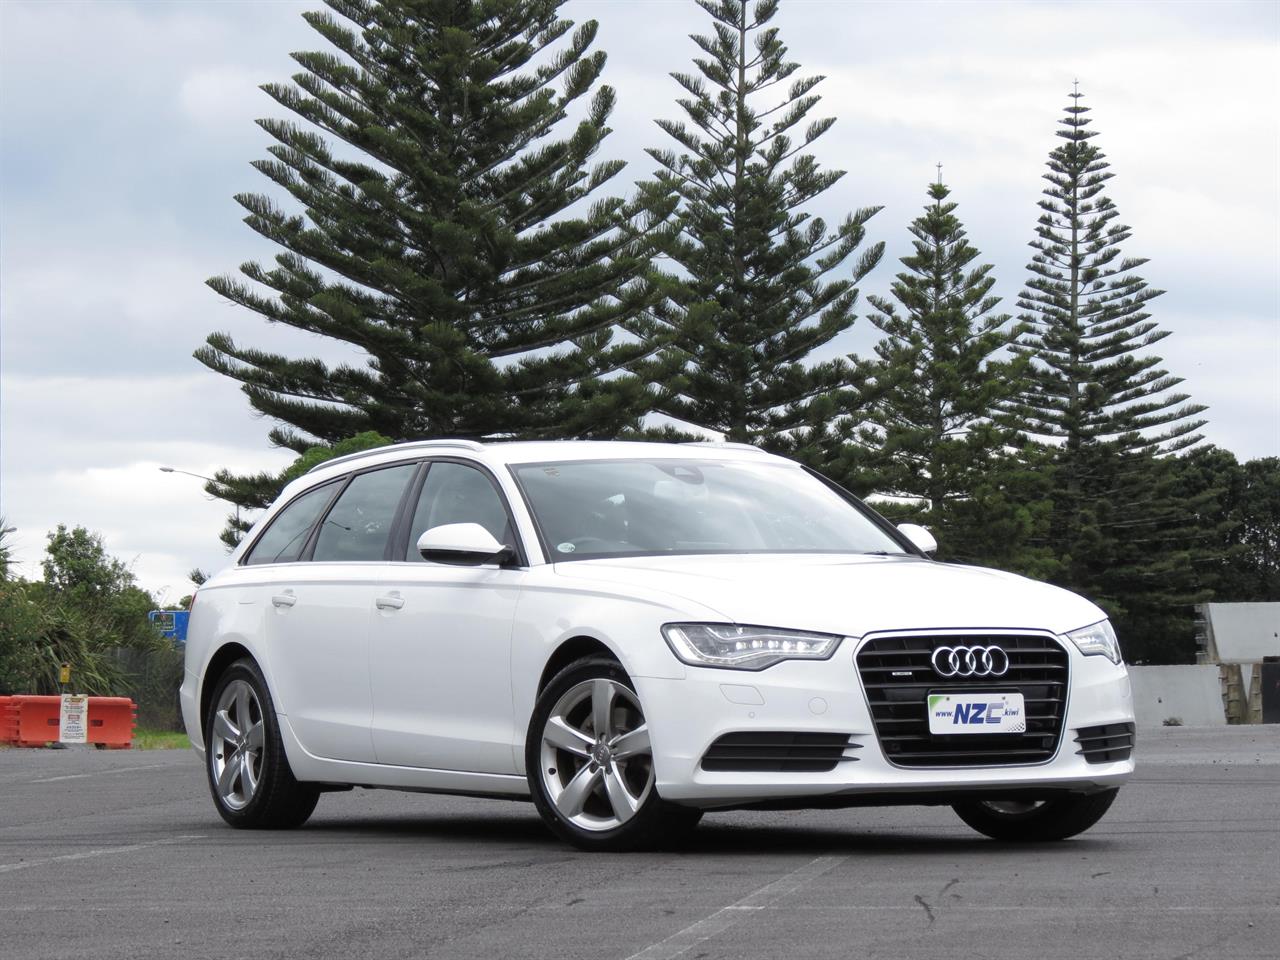 NZC best hot price for 2012 Audi A6 in Auckland